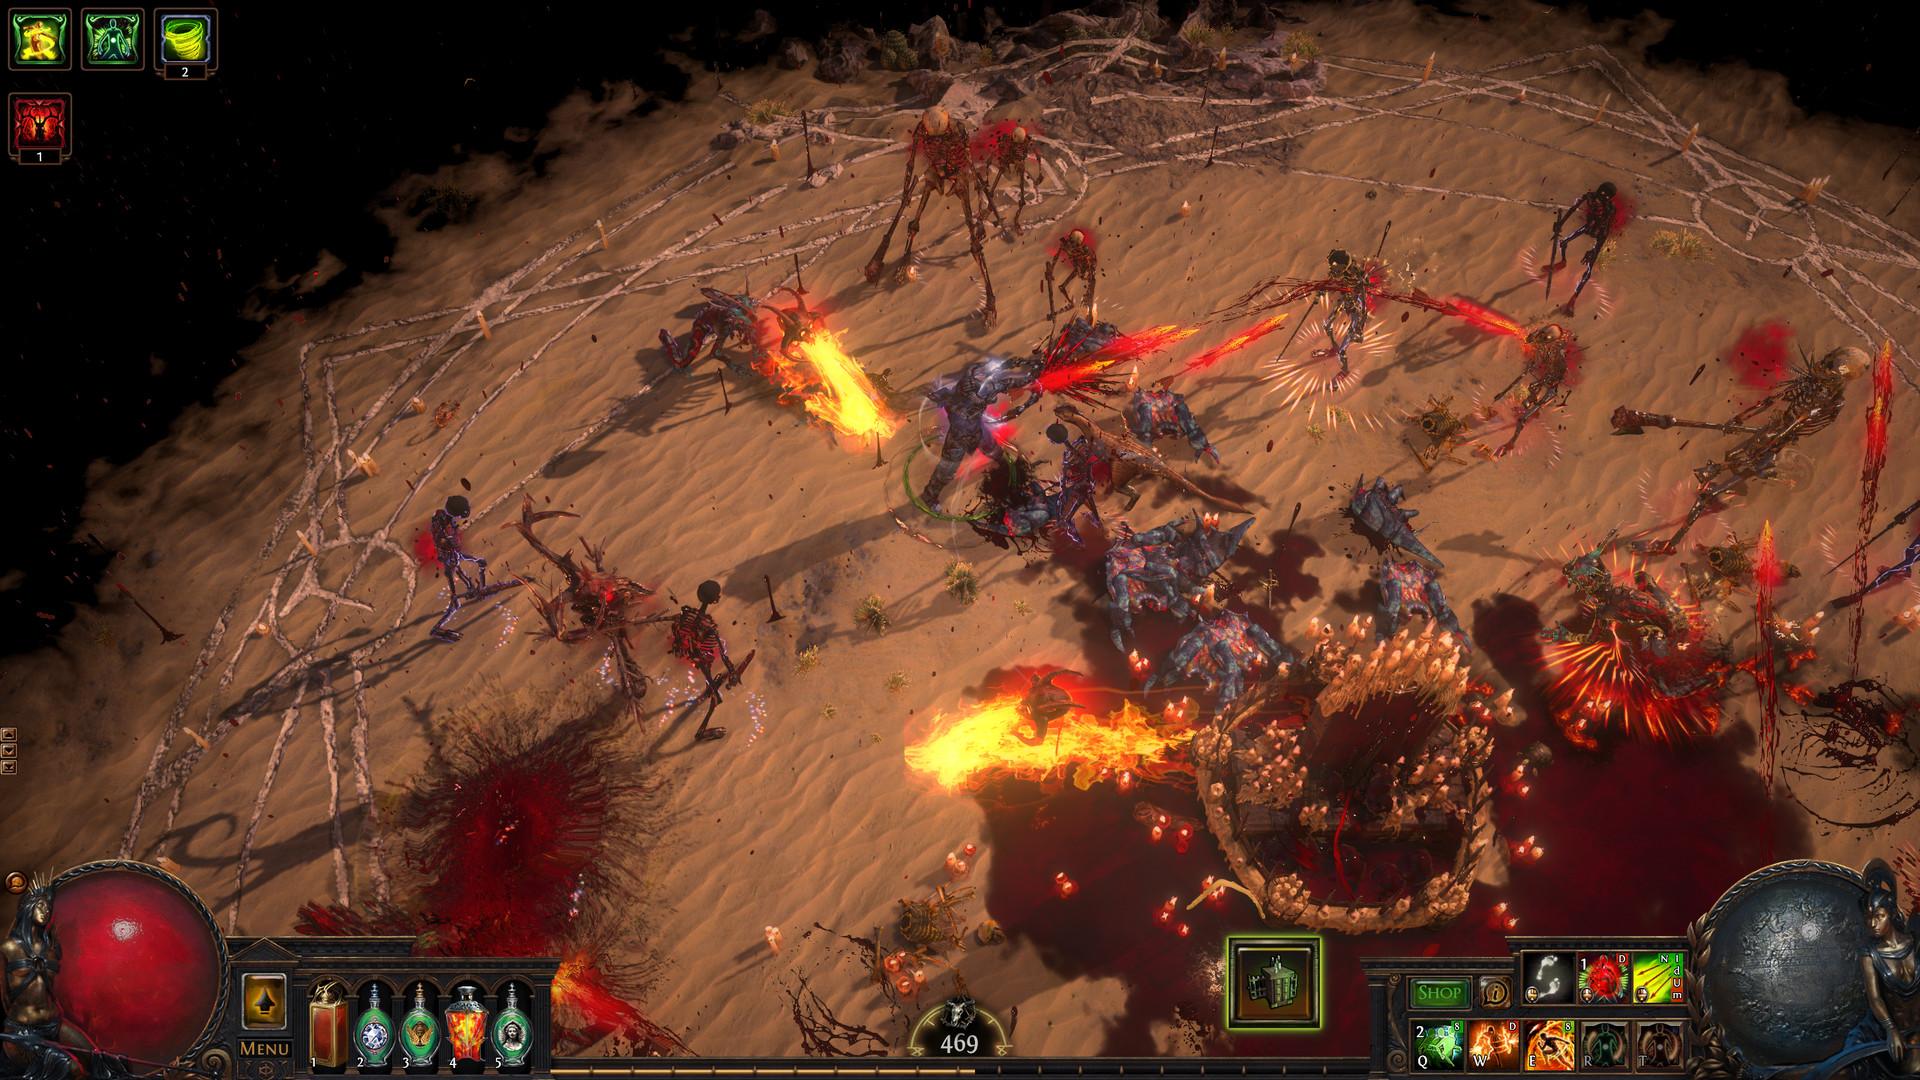 Screenshot №10 from game Path of Exile